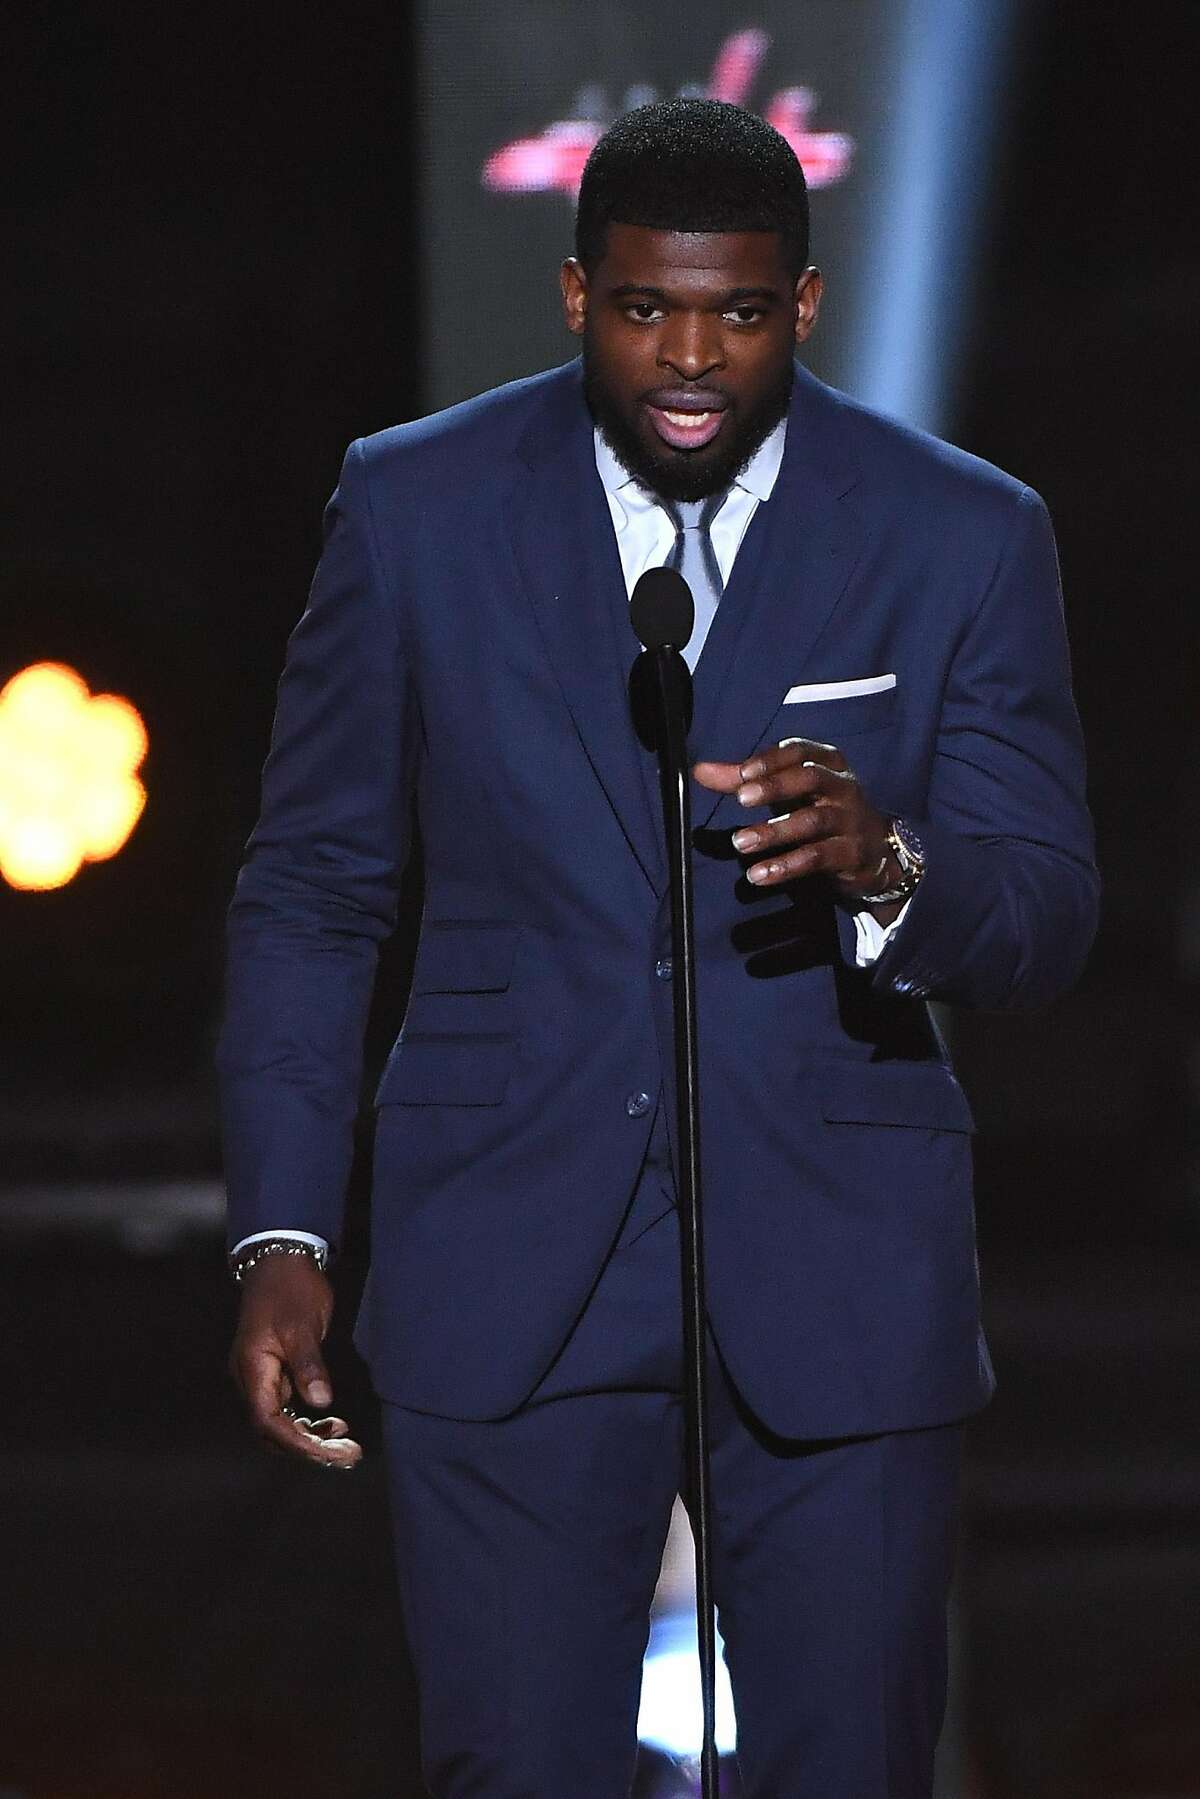 LAS VEGAS, NEVADA - JUNE 19: P. K. Subban of the Nashville Predators speaks during the 2019 NHL Awards at the Mandalay Bay Events Center on June 19, 2019 in Las Vegas, Nevada. (Photo by Ethan Miller/Getty Images)